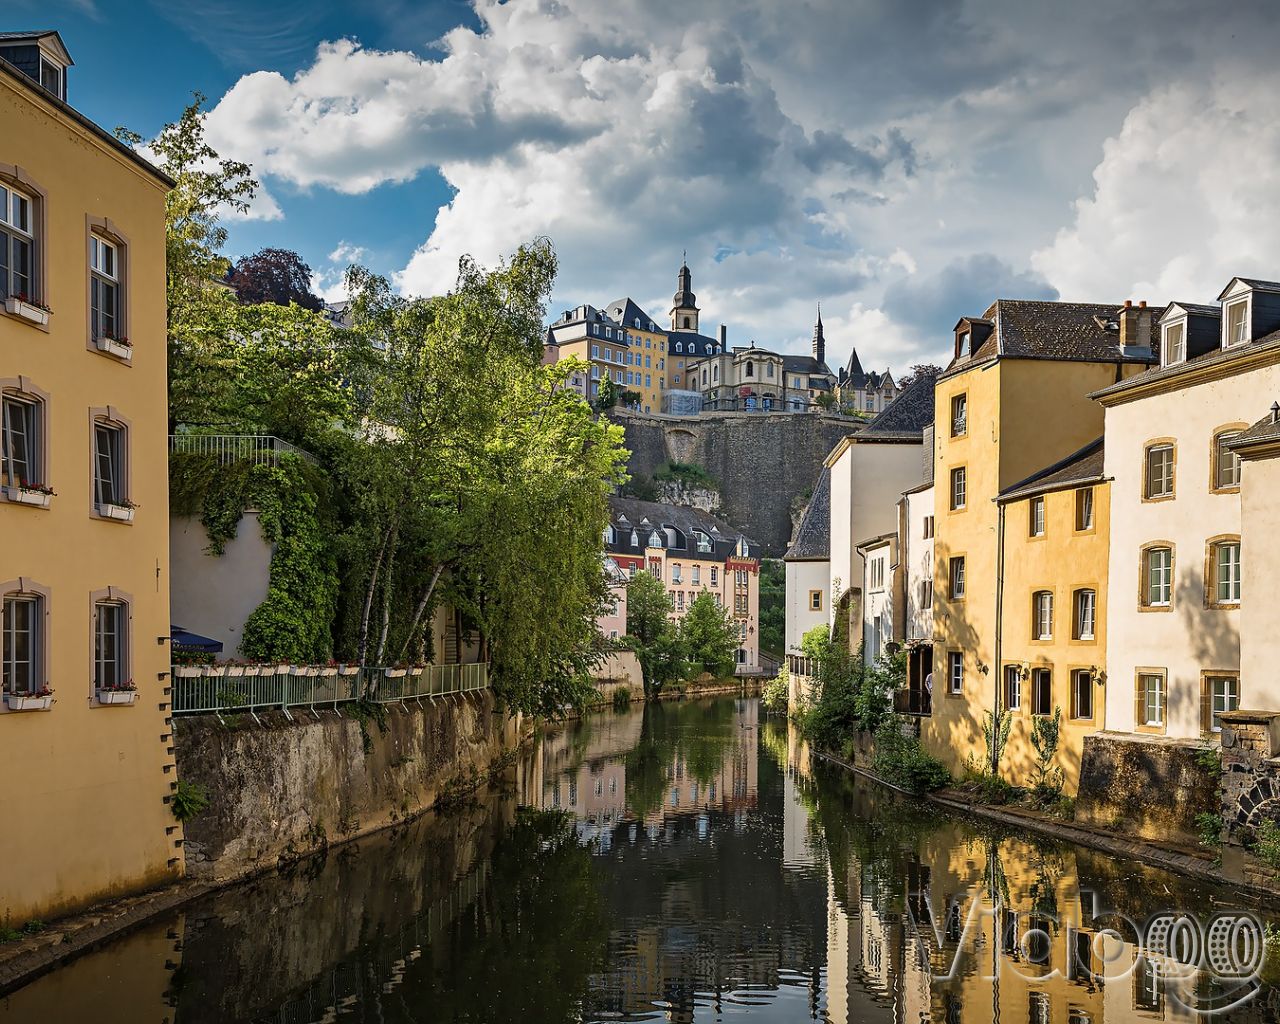 Discover scenic routes and drives through natural beauty in Luxembourg